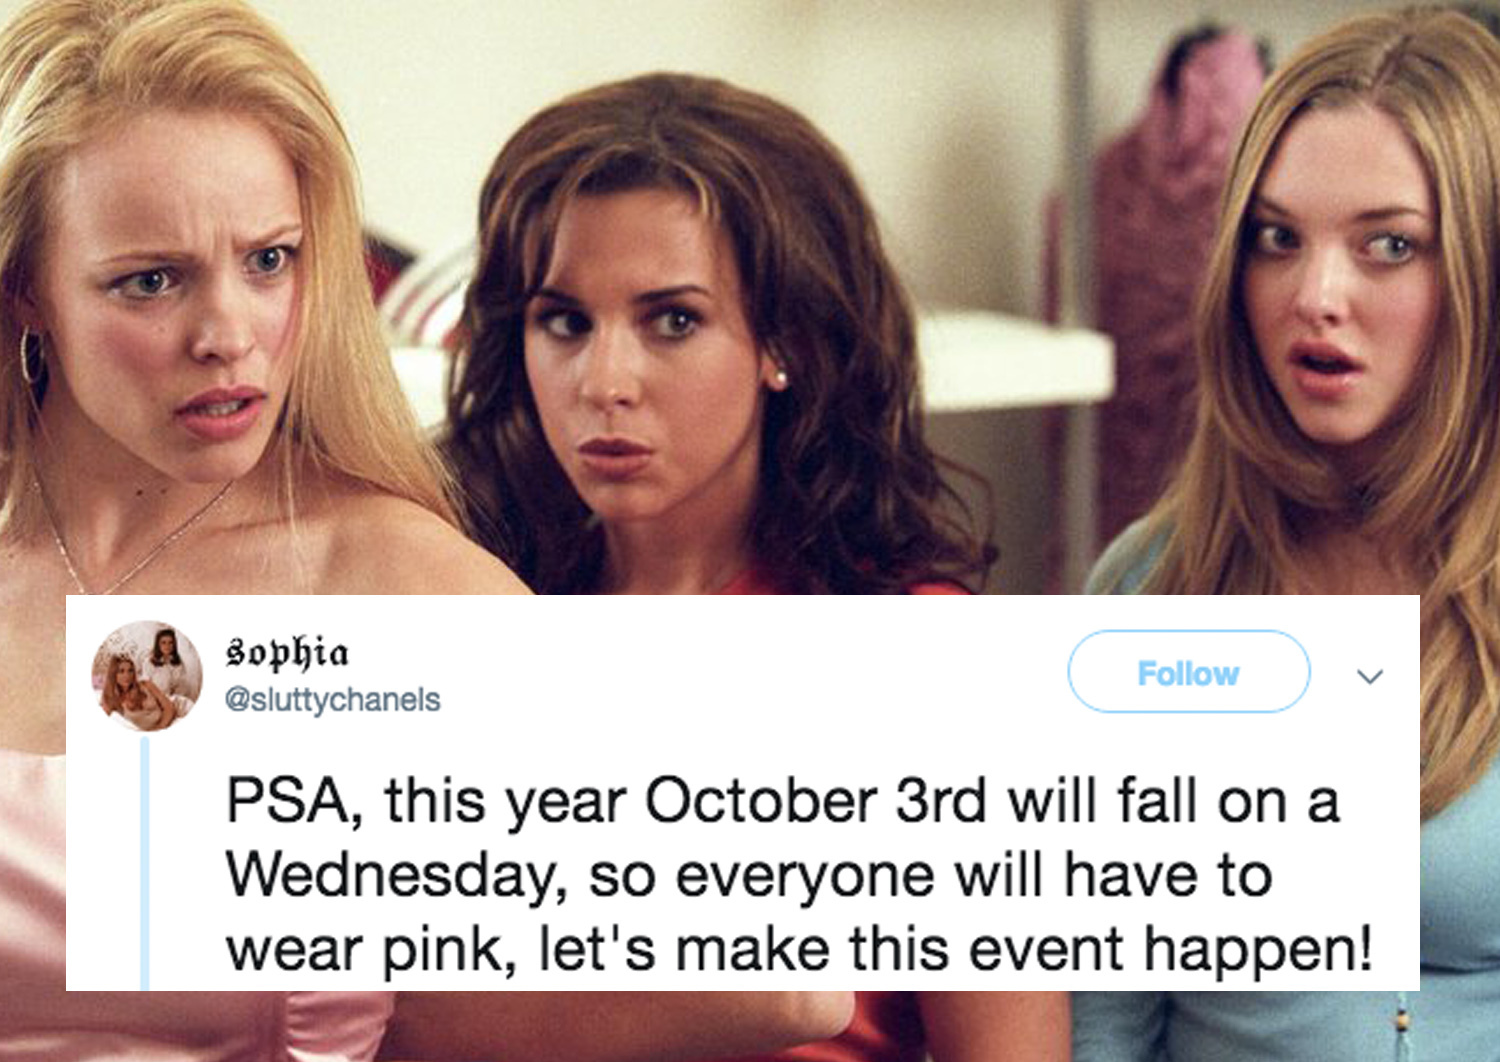 Like I was going to wear any other colour but pink on October 3rd